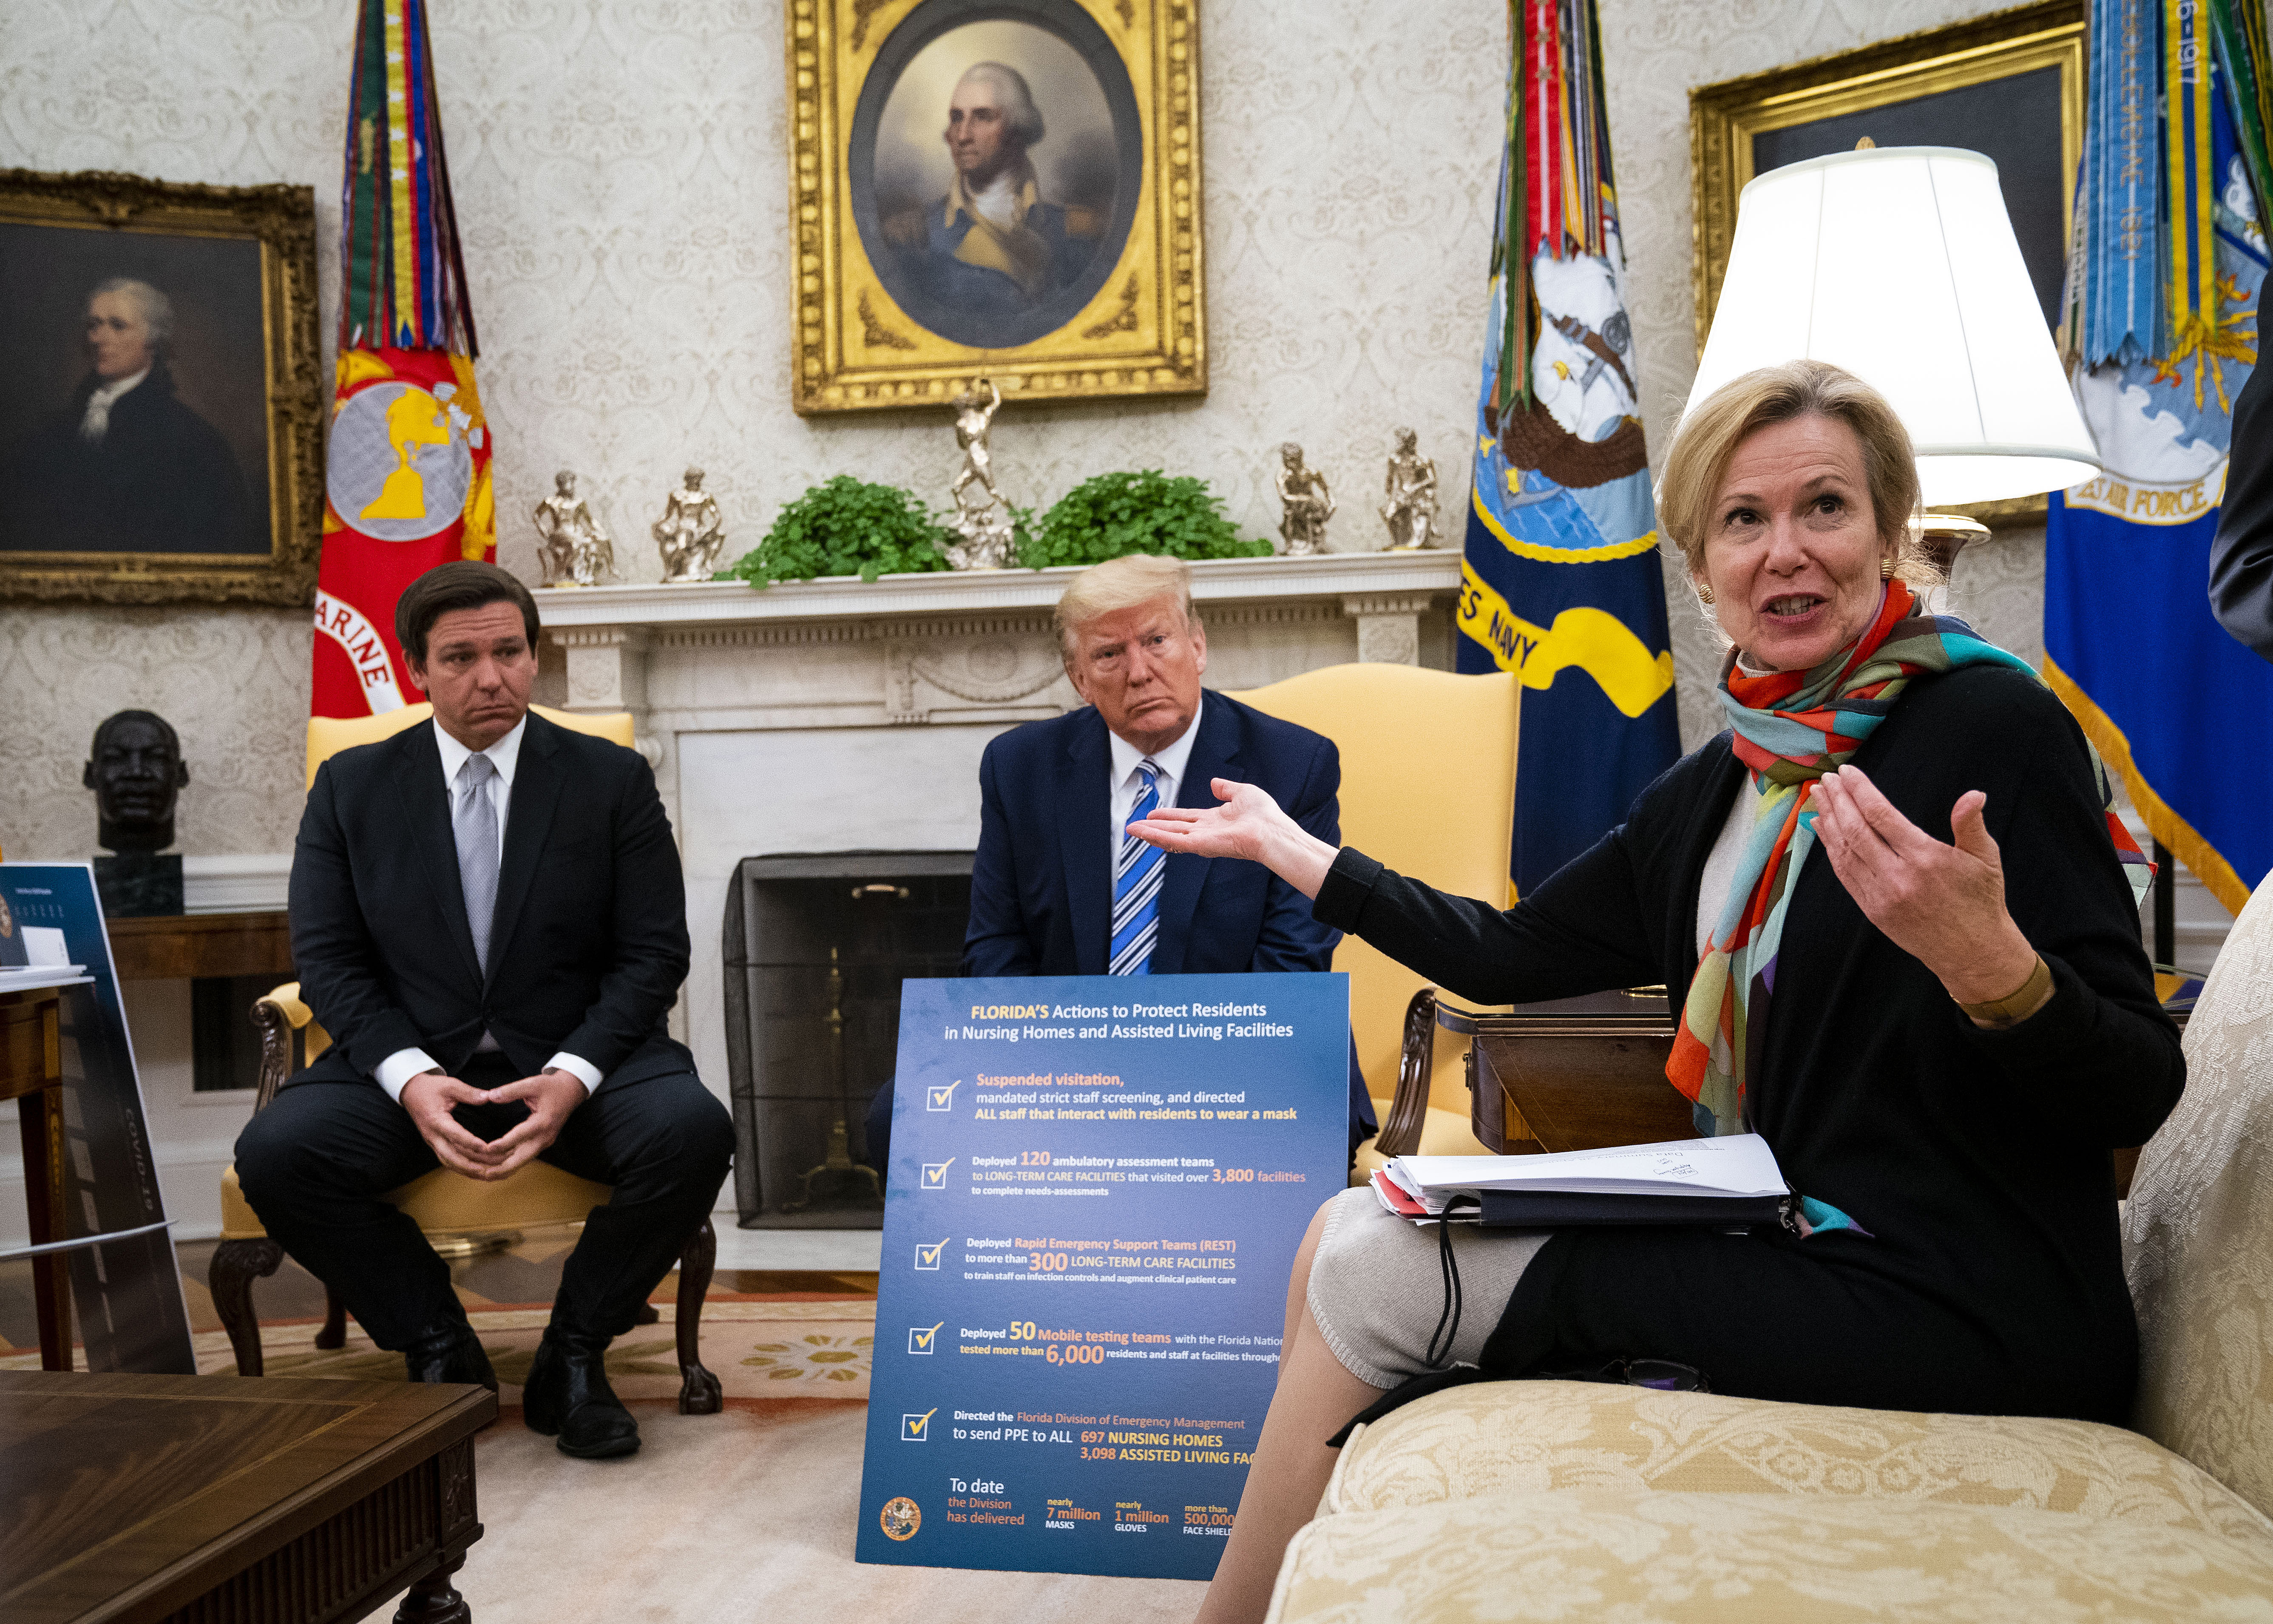 WASHINGTON, DC - APRIL 28: White House Coronavirus Task Force Coordinator Deborah Birx (R) answers a question while meeting with Florida Gov. Ron DeSantis (L) and U.S. President Donald Trump and in the Oval Office of the White House on April 28, 2020 in Washington, DC. Trump met with DeSantis to discuss ways that Florida is planning to gradually re-open the state in the wake of the COVID-19 pandemic. (Photo by Doug Mills/The New York Times/Pool/Getty Images)